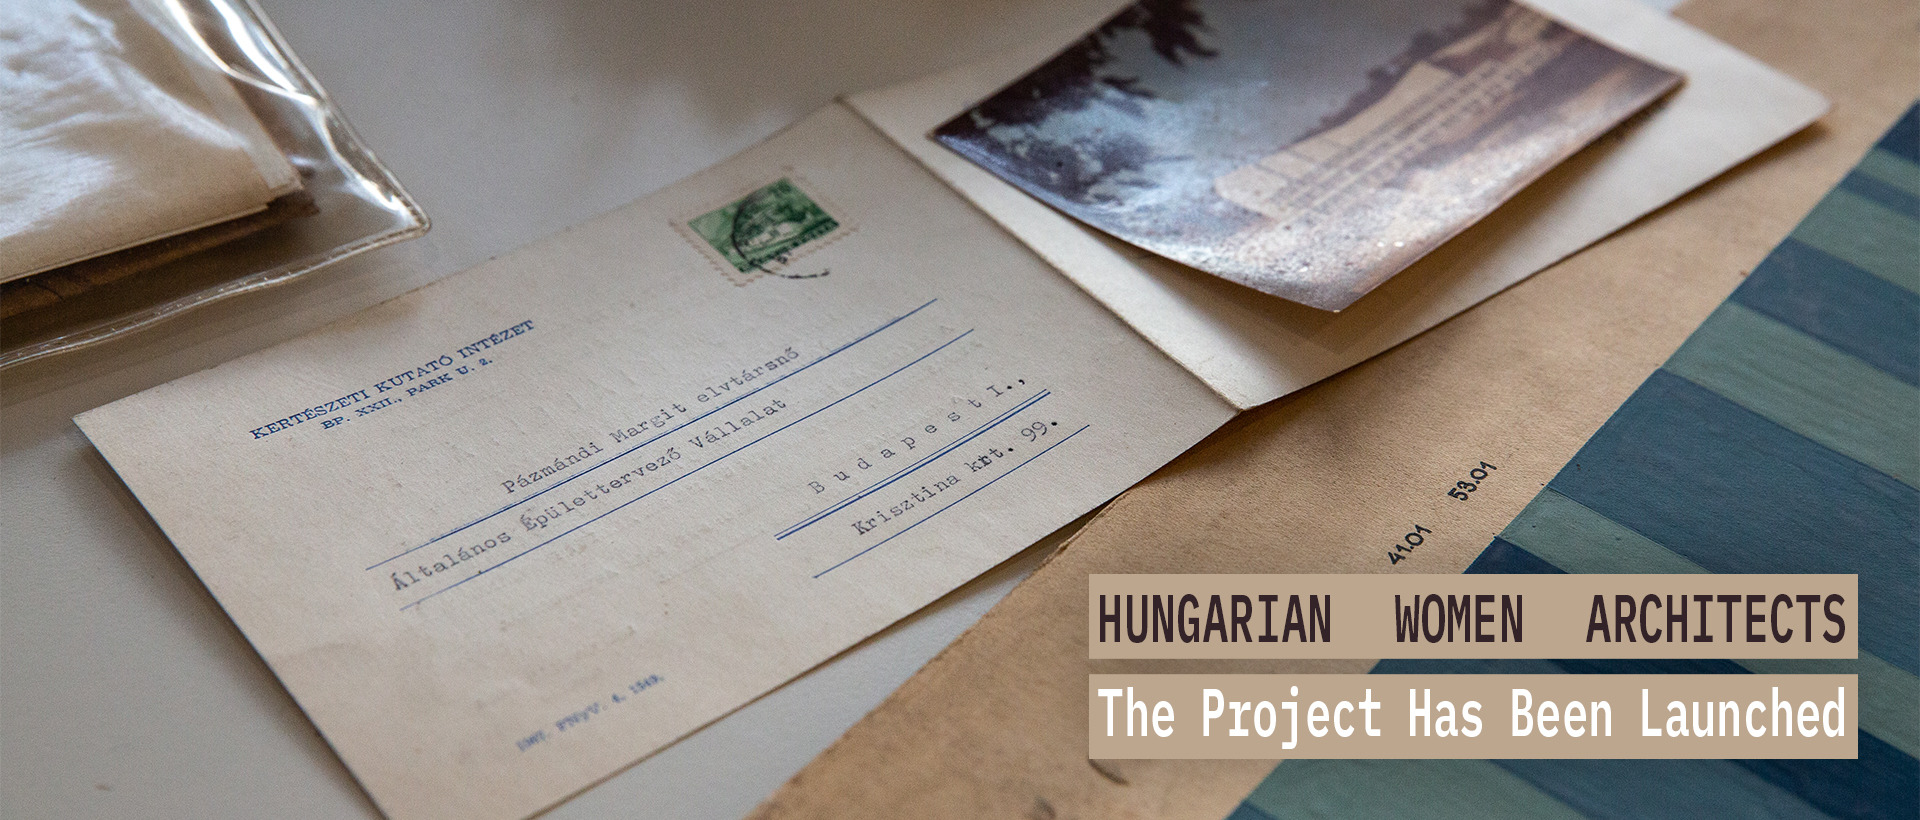 Hungarian Women Architects – The Project Has Been Launched 